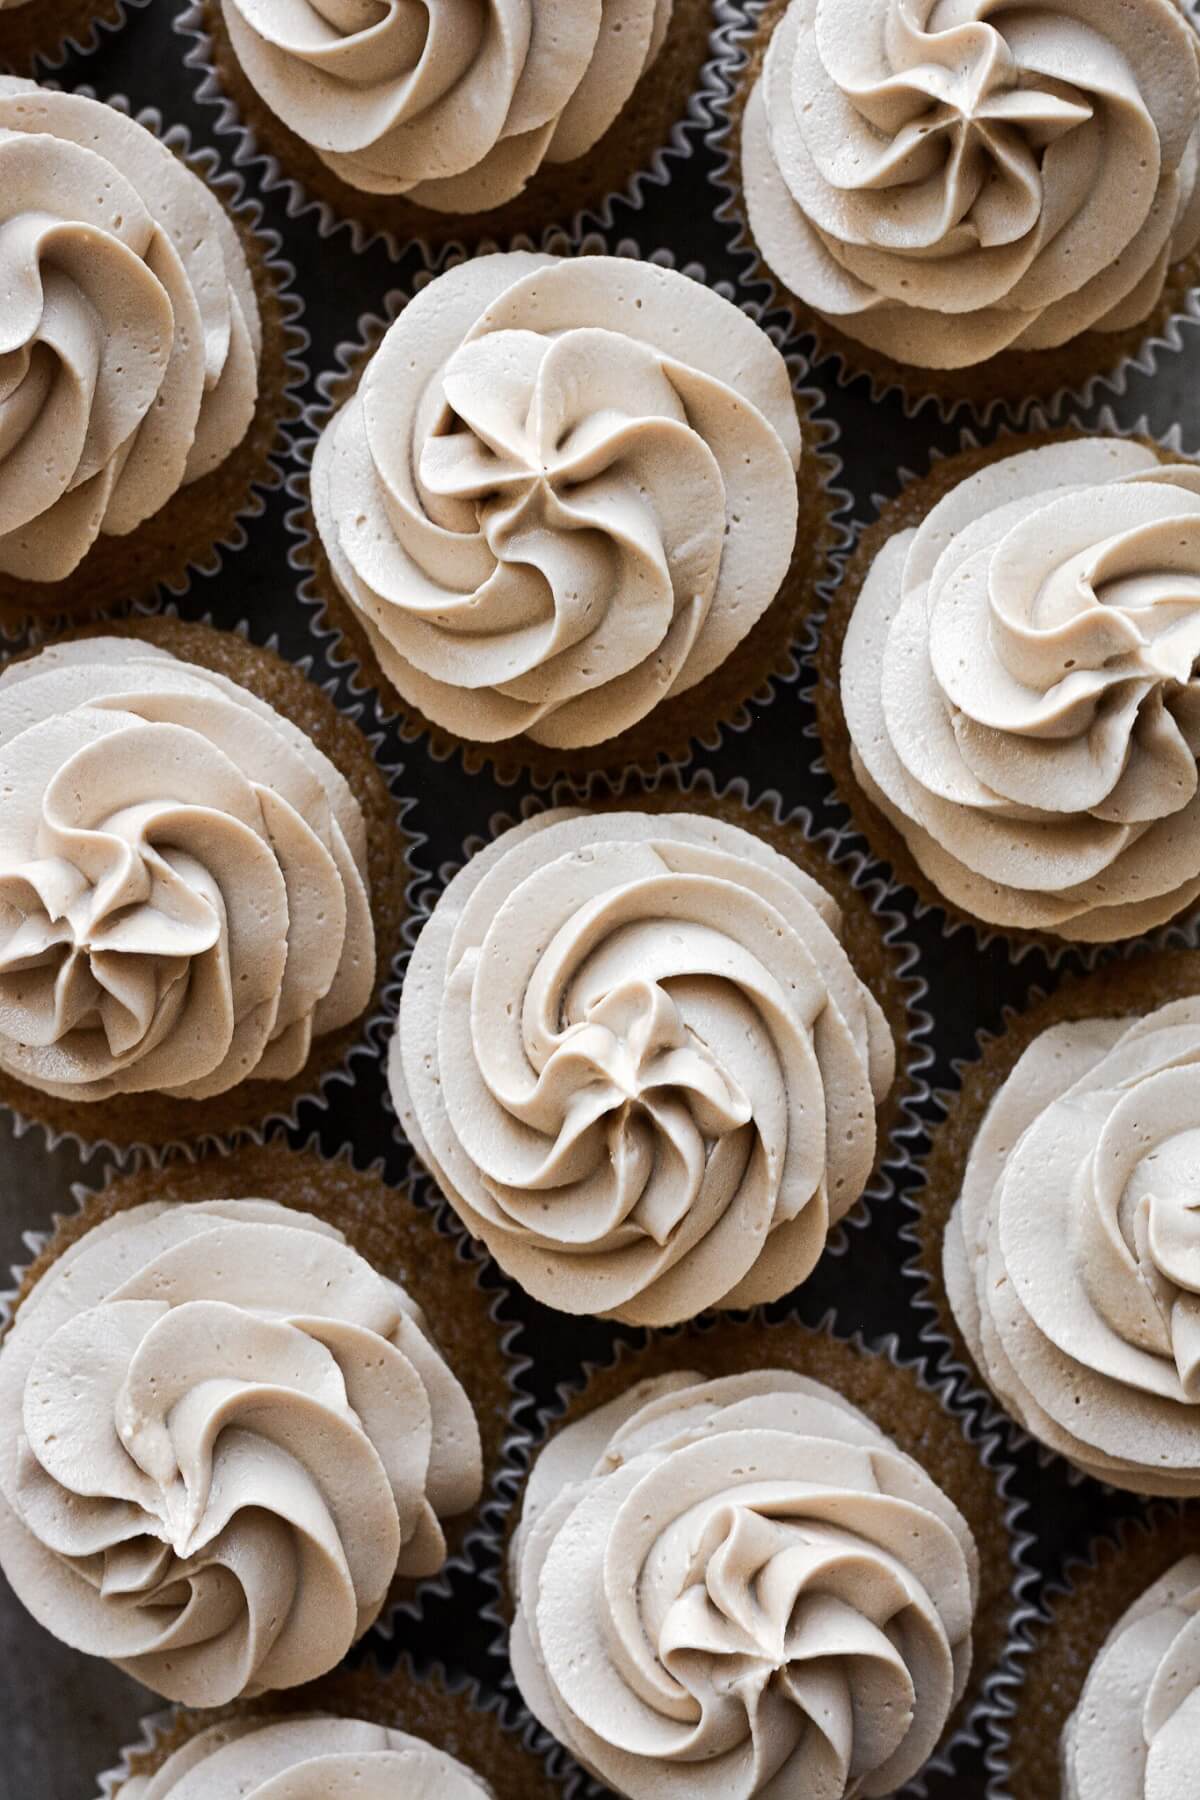 Coffee buttercream piped onto cupcakes.